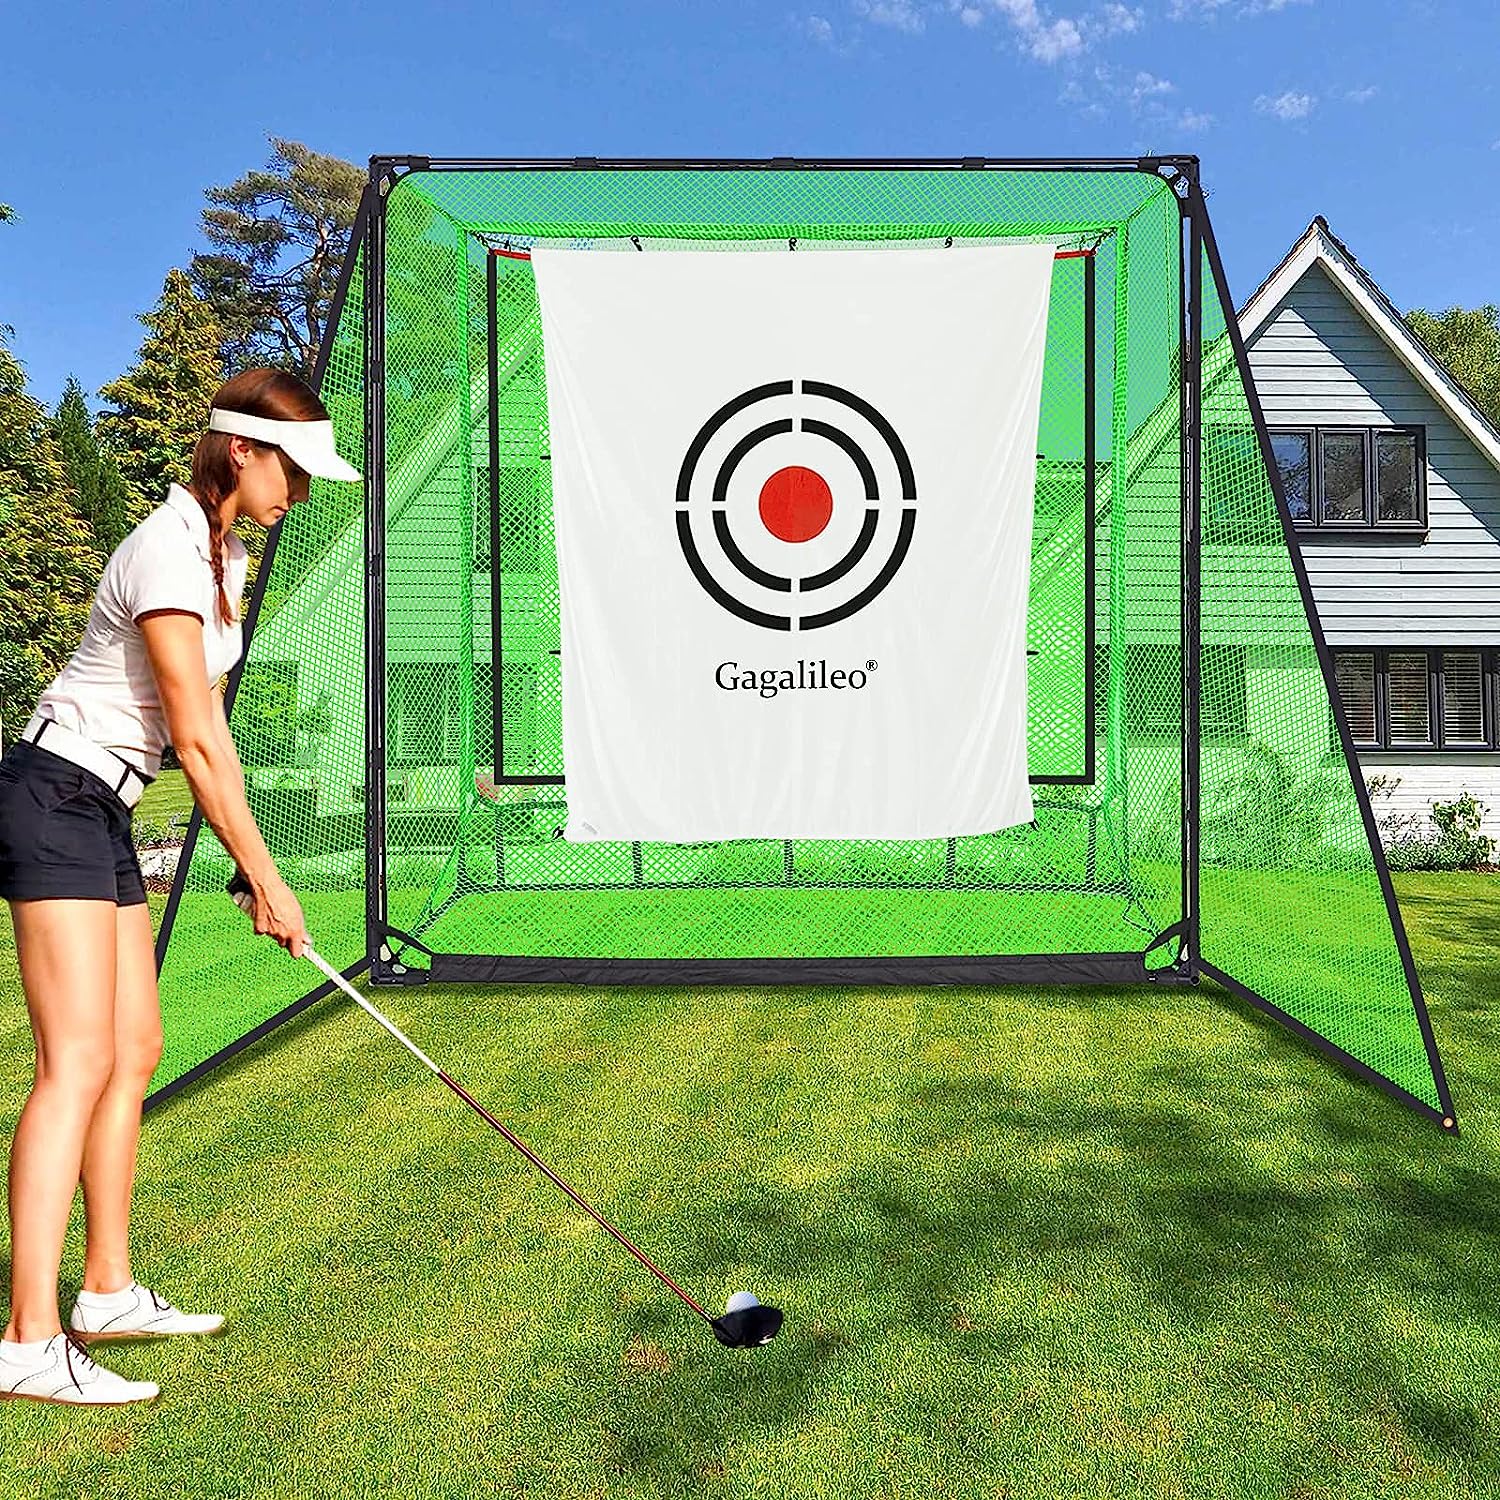 Gagalileo Golf Net Hitting Cage Practice Driving Net 6.6x3.3X6.6 Indoor&Outdoor High Impact Double Back Stop with Target Training Aids Automatic Ball Return Net for Backyard